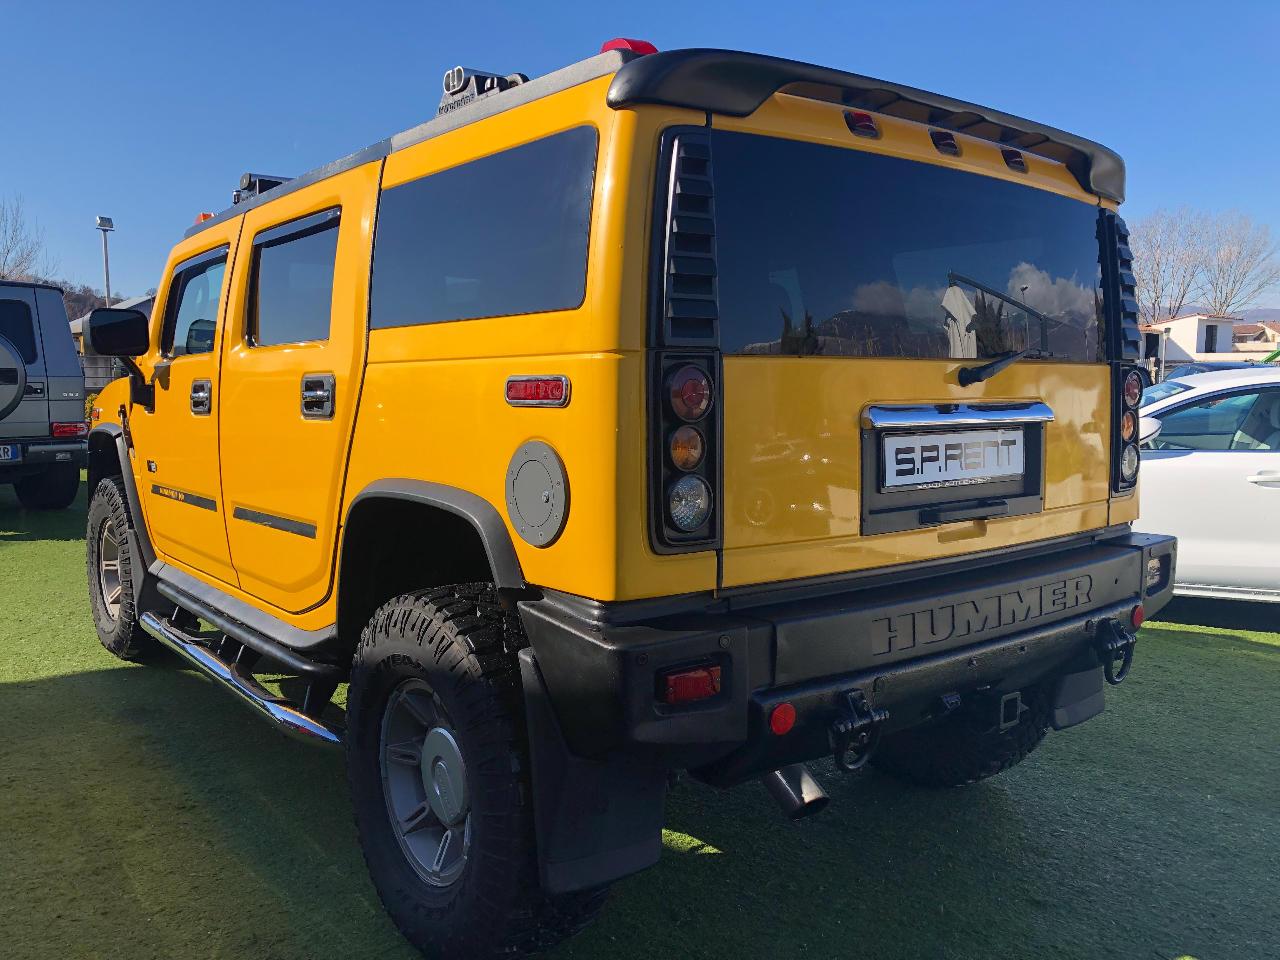 HUMMER H2 6.0 V8 SUPERCHARGERS BOSE/SCARICHI/TETTO/ASSETTO